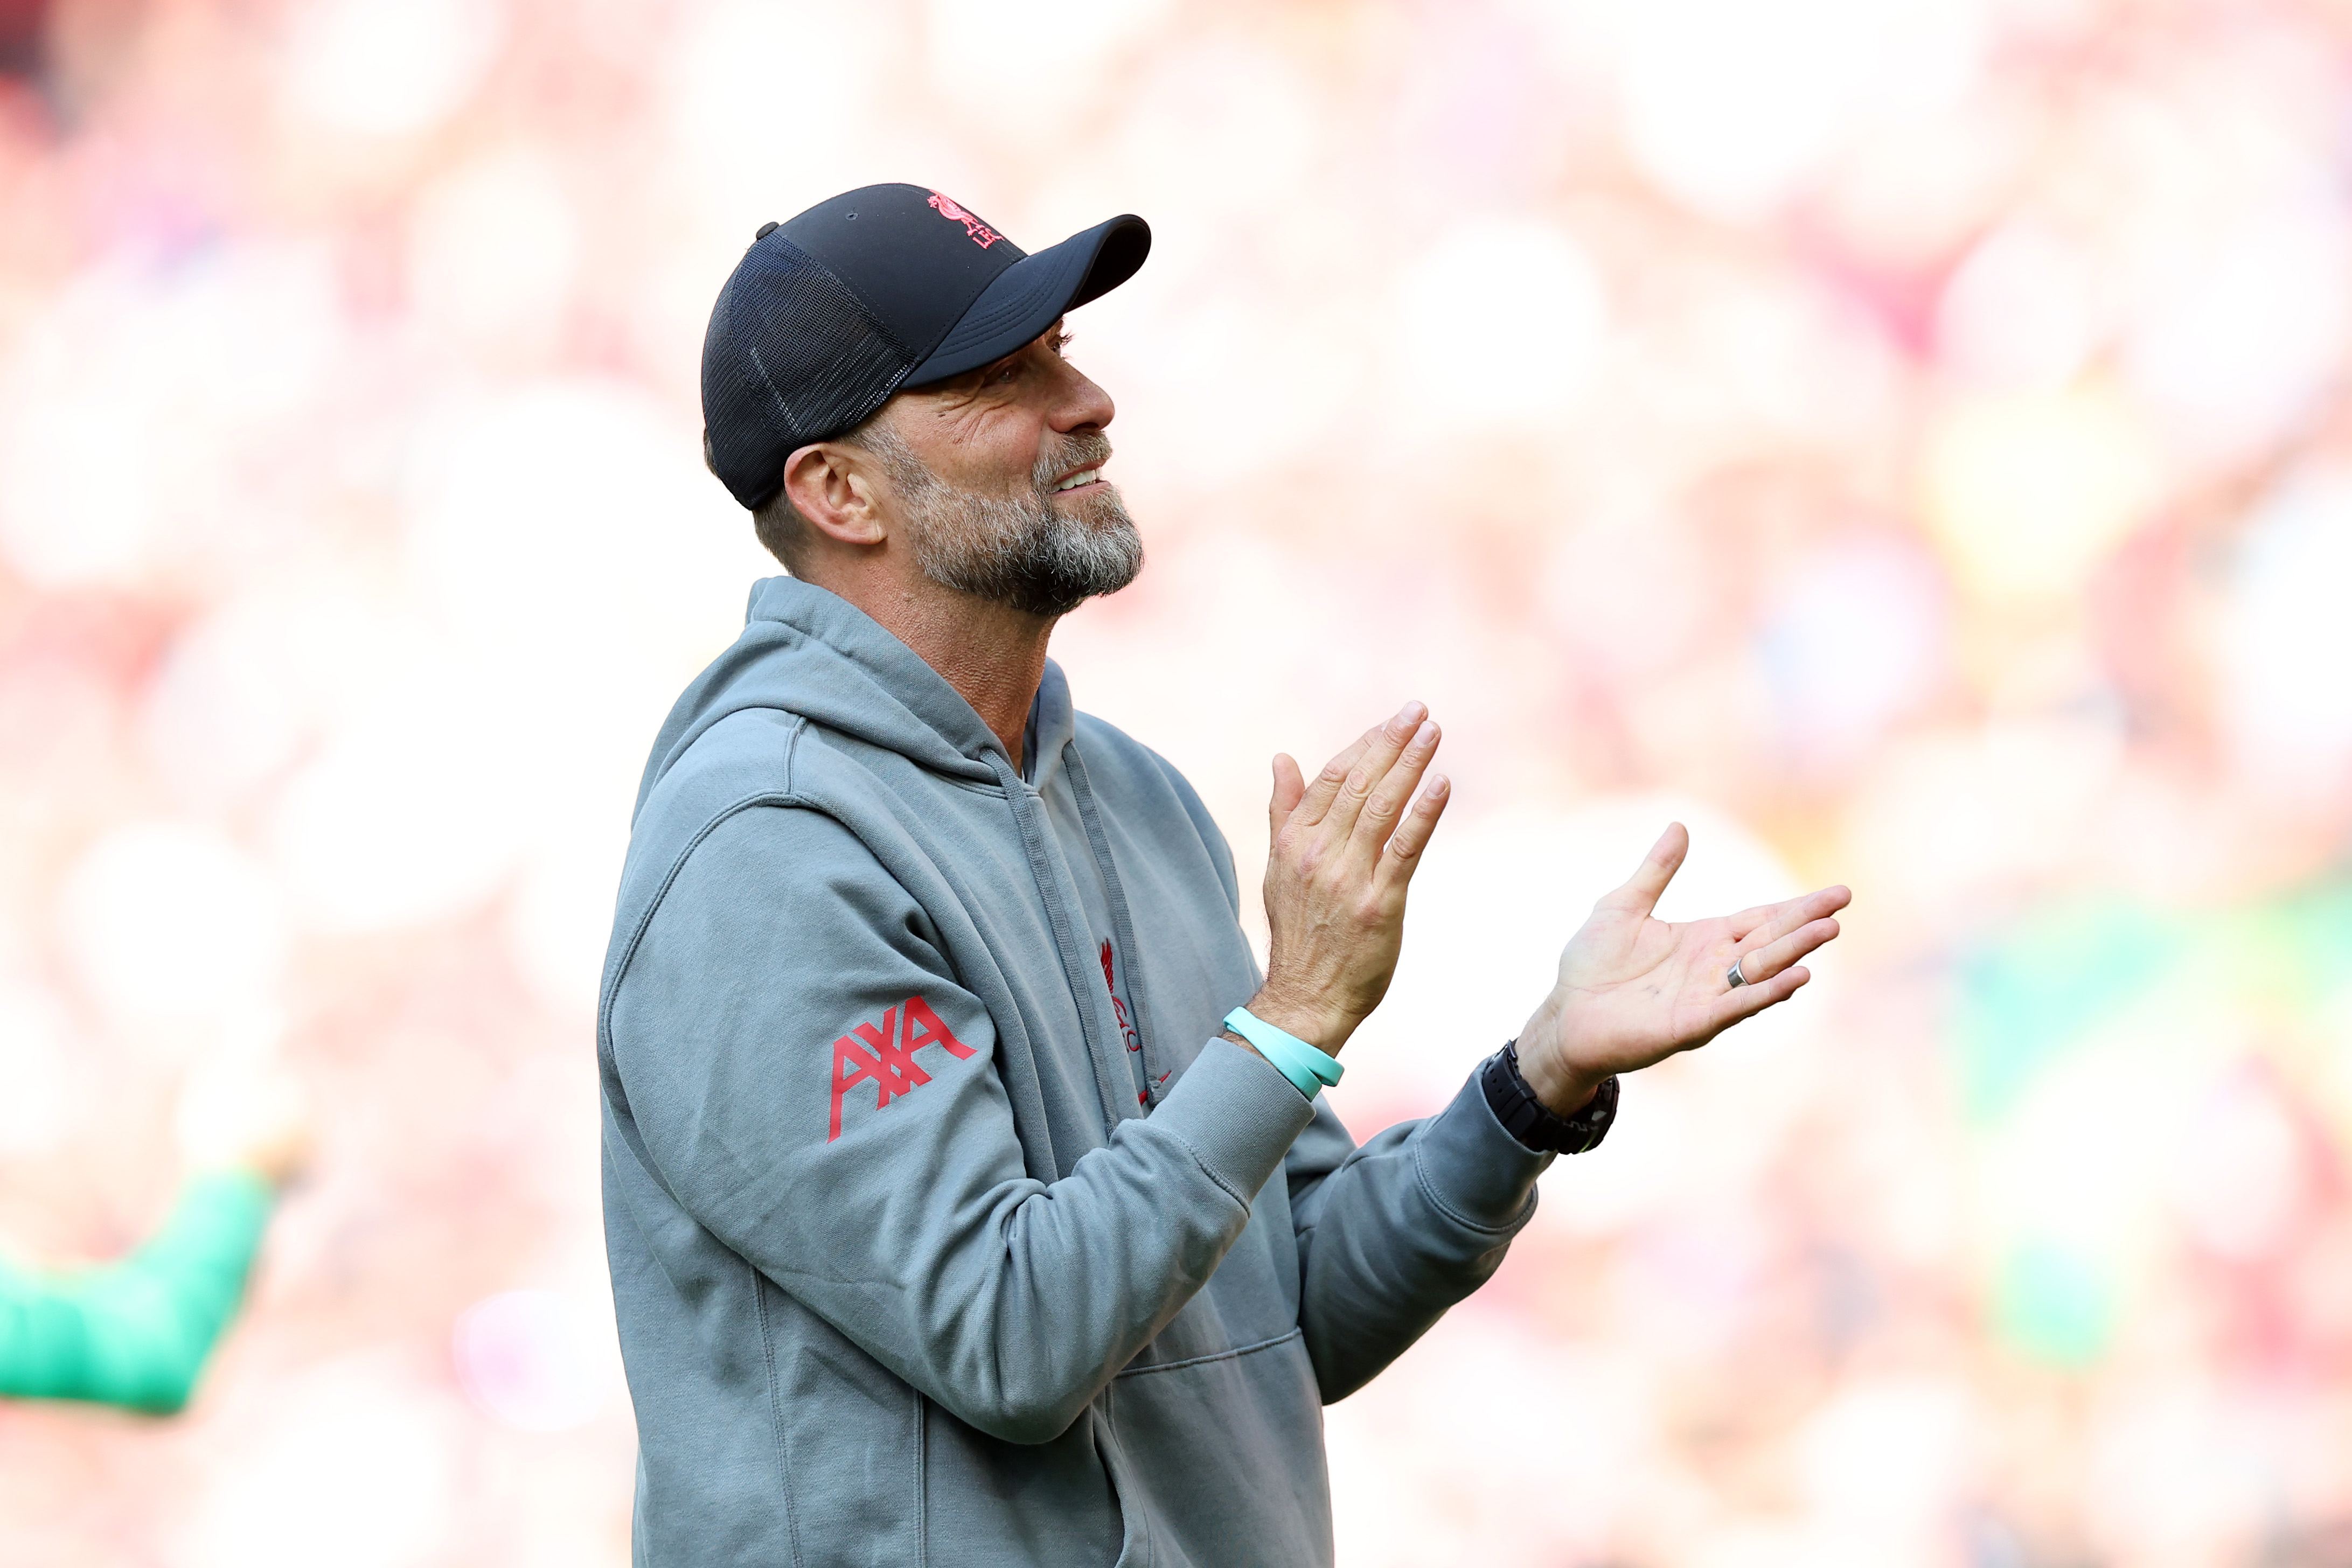 Jurgen Klopp pays glowing tribute to departing Liverpool ace whose future is uncertain